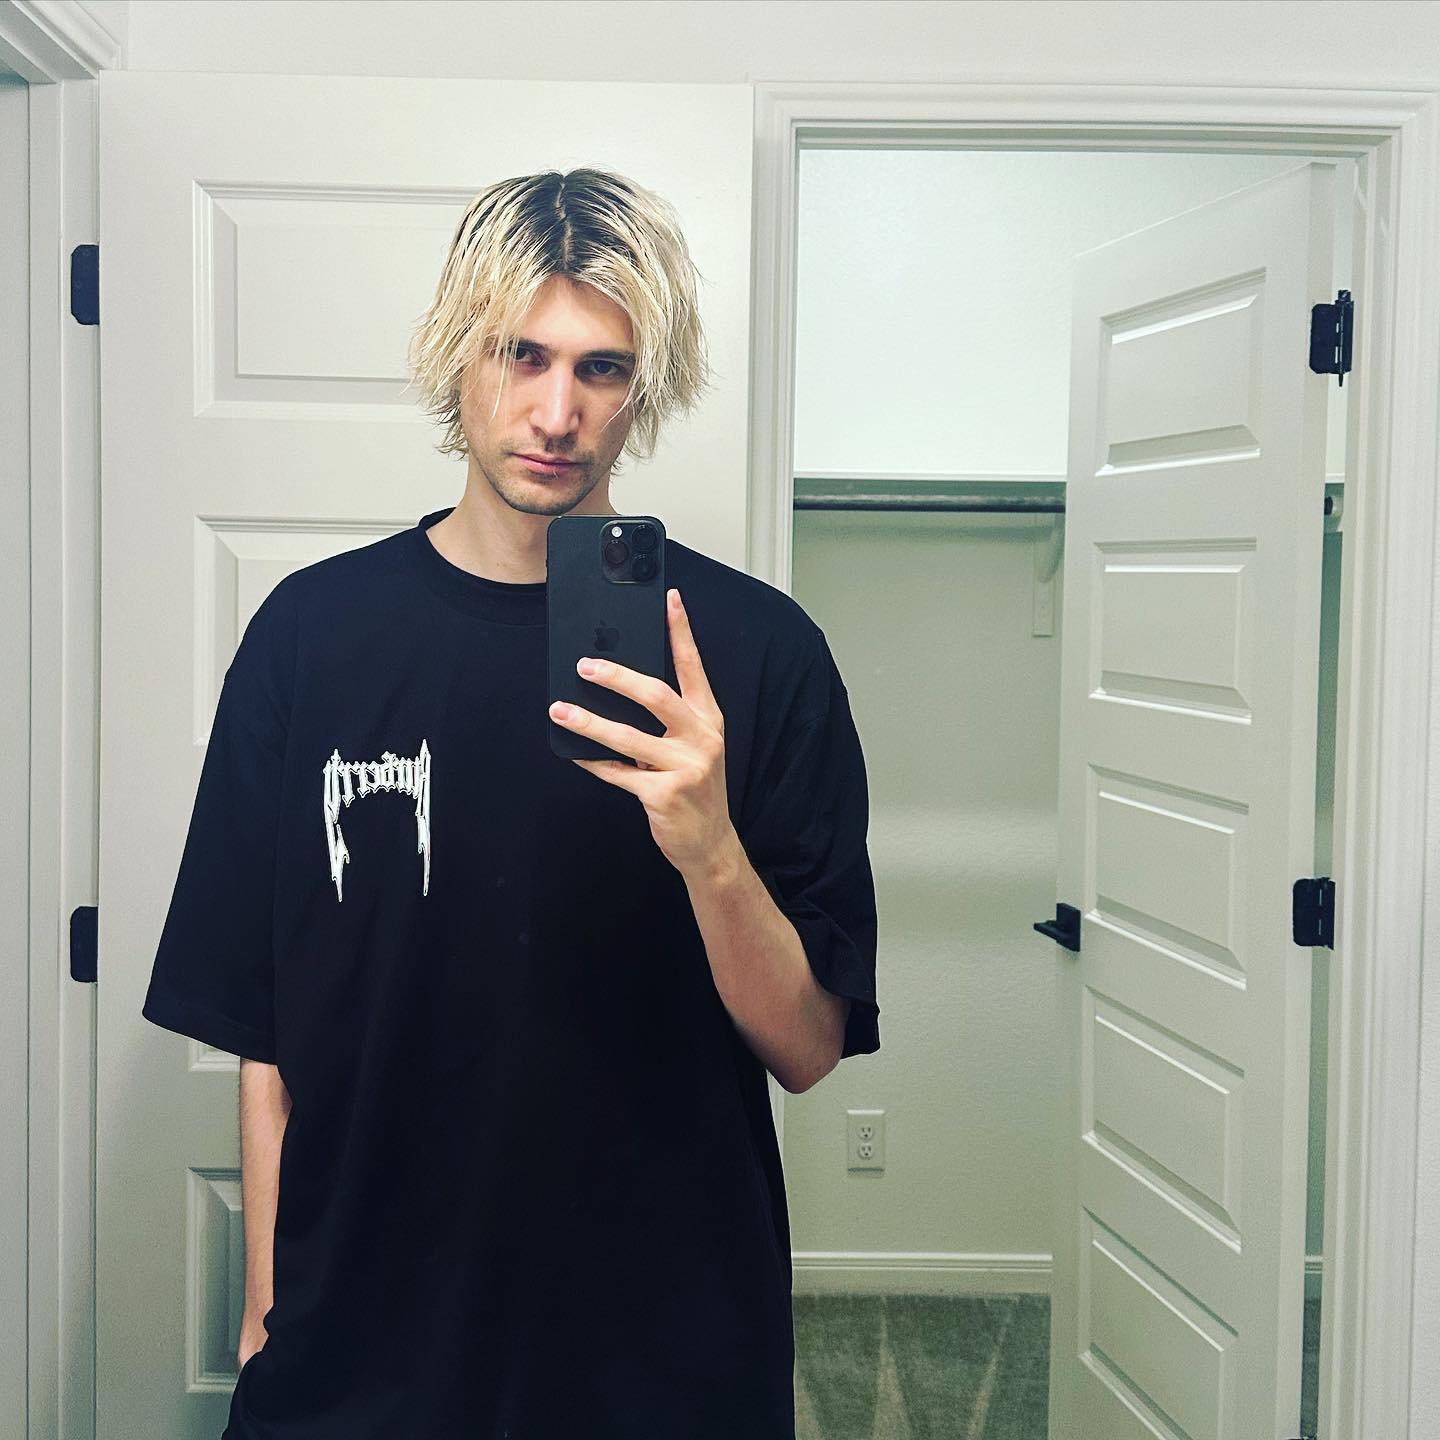 xQc Biography: Net Worth, Girlfriend, YouTube, Age, Voice, Reddit, Twitch, Real Name